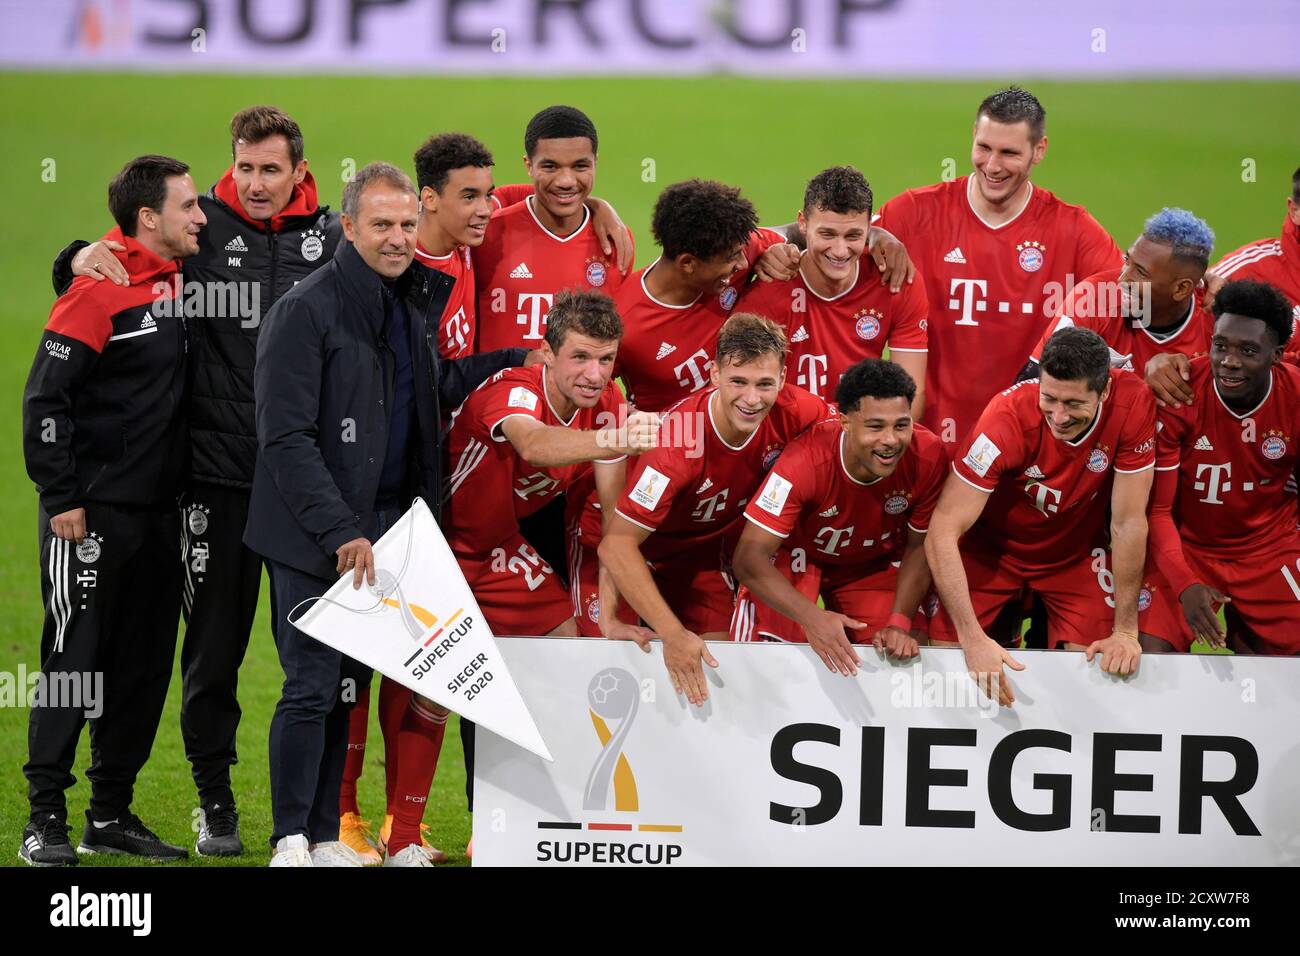 Dfl supercup sieger hi-res stock photography and images - Alamy